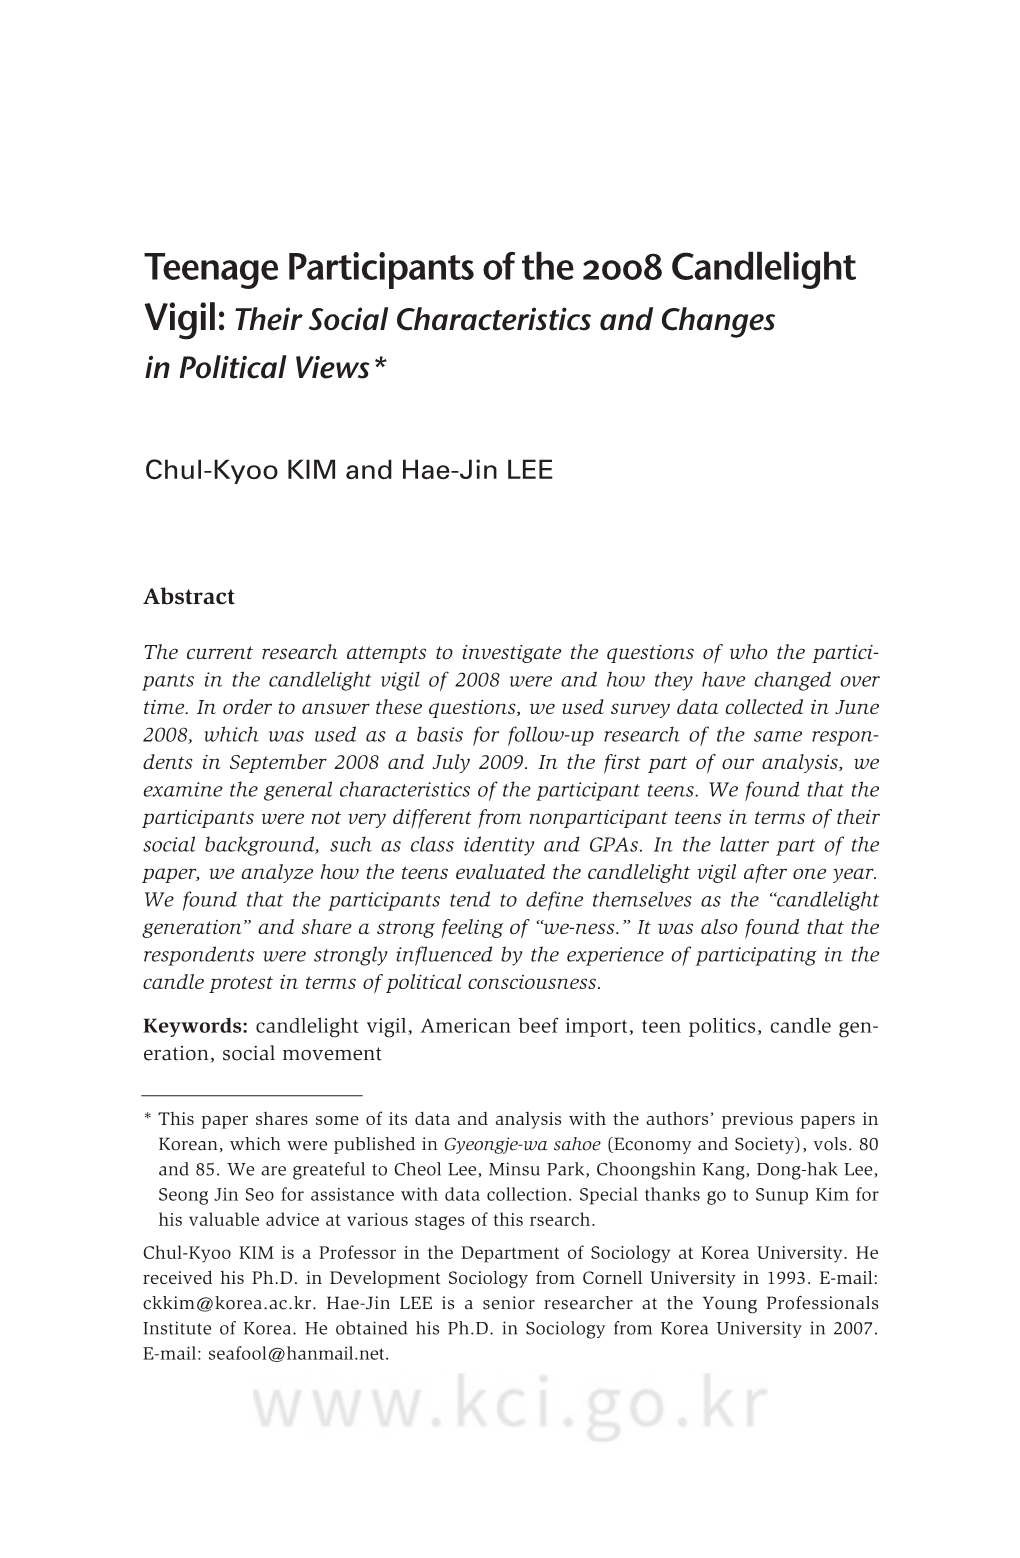 Teenage Participants of the 2008 Candlelight Vigil: Their Social Characteristics and Changes in Political Views*